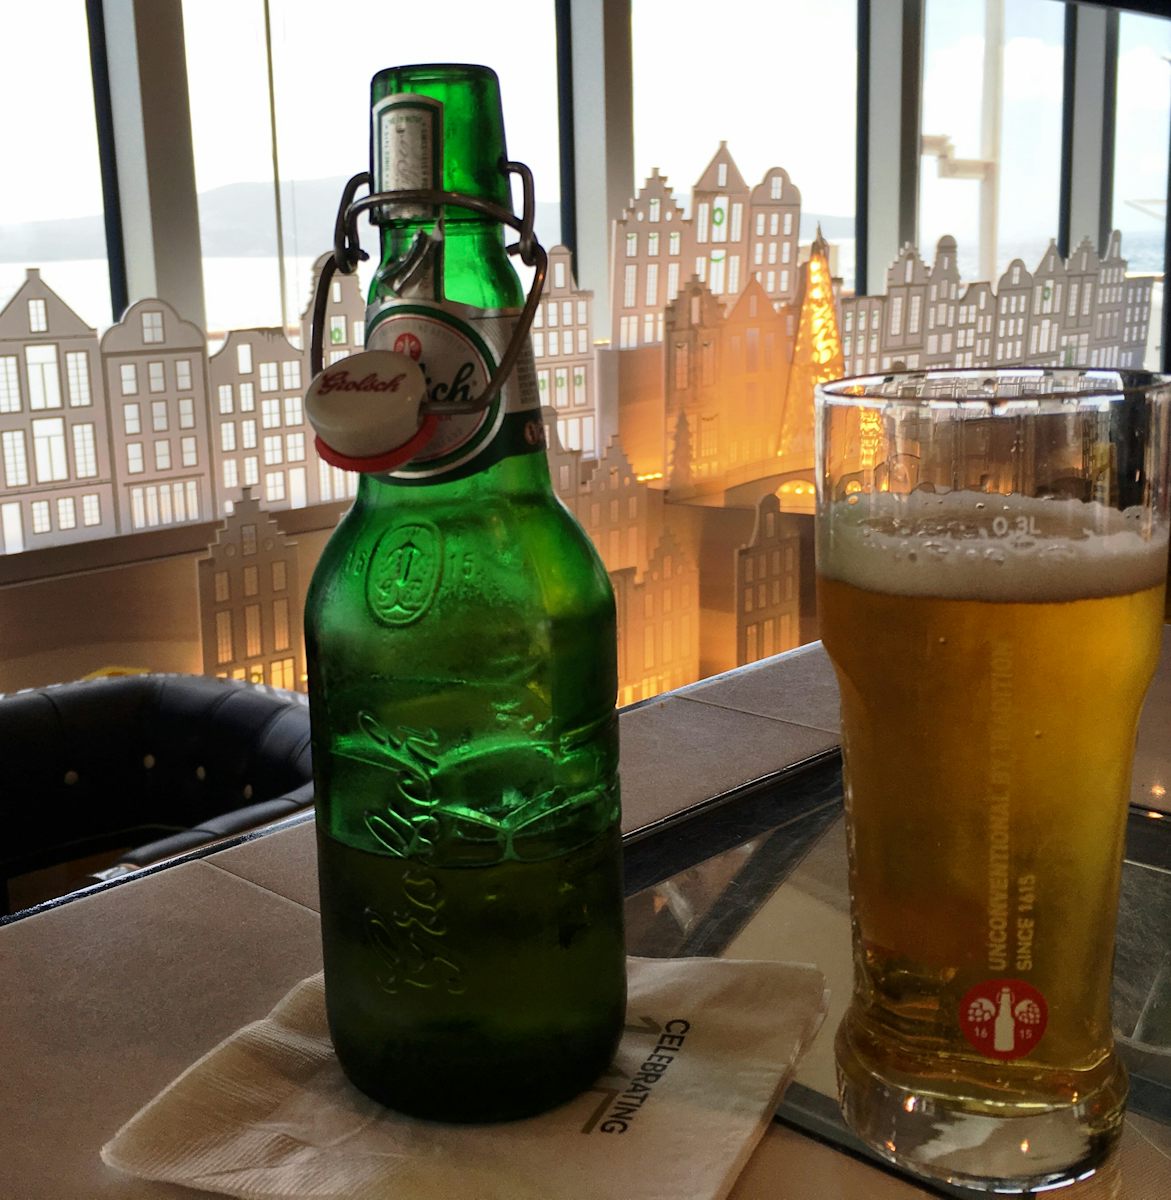 Enjoying Grolsch in the Dutch Cafe...which happened frequently during our c